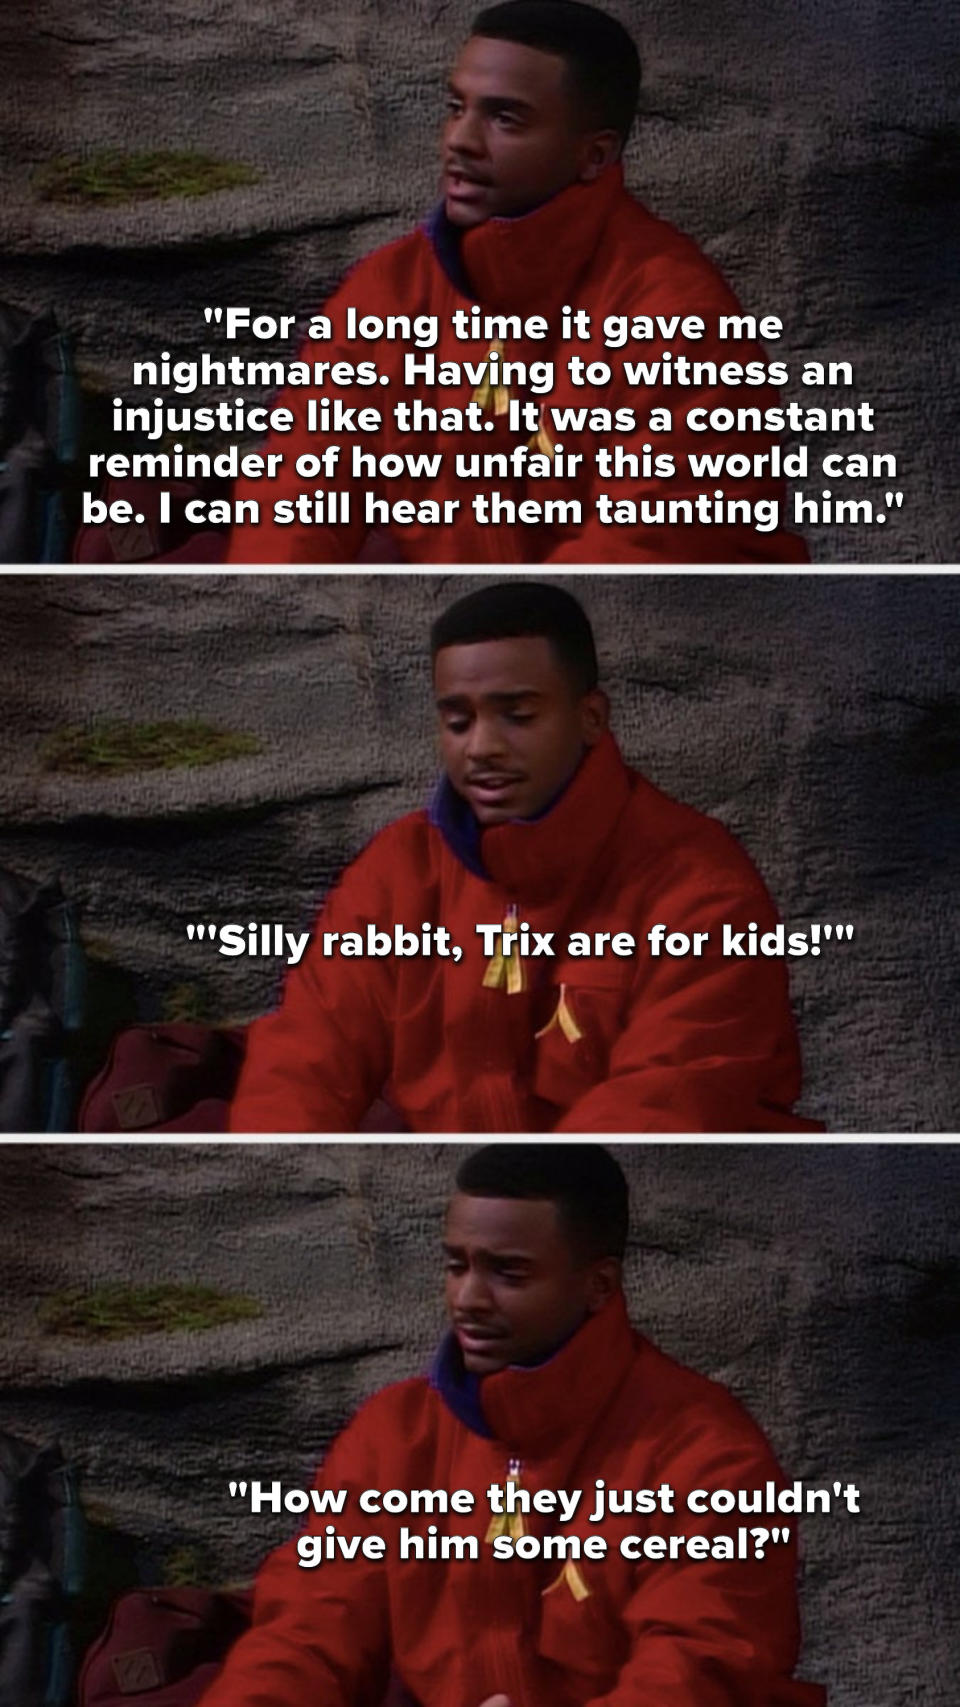 Carlton says, It gave me nightmares, witnessing an injustice like that, it was a constant reminder of how unfair this world can be, I can still hear them taunting him, Silly rabbit, Trix are for kids, How come they just could not give him some cereal